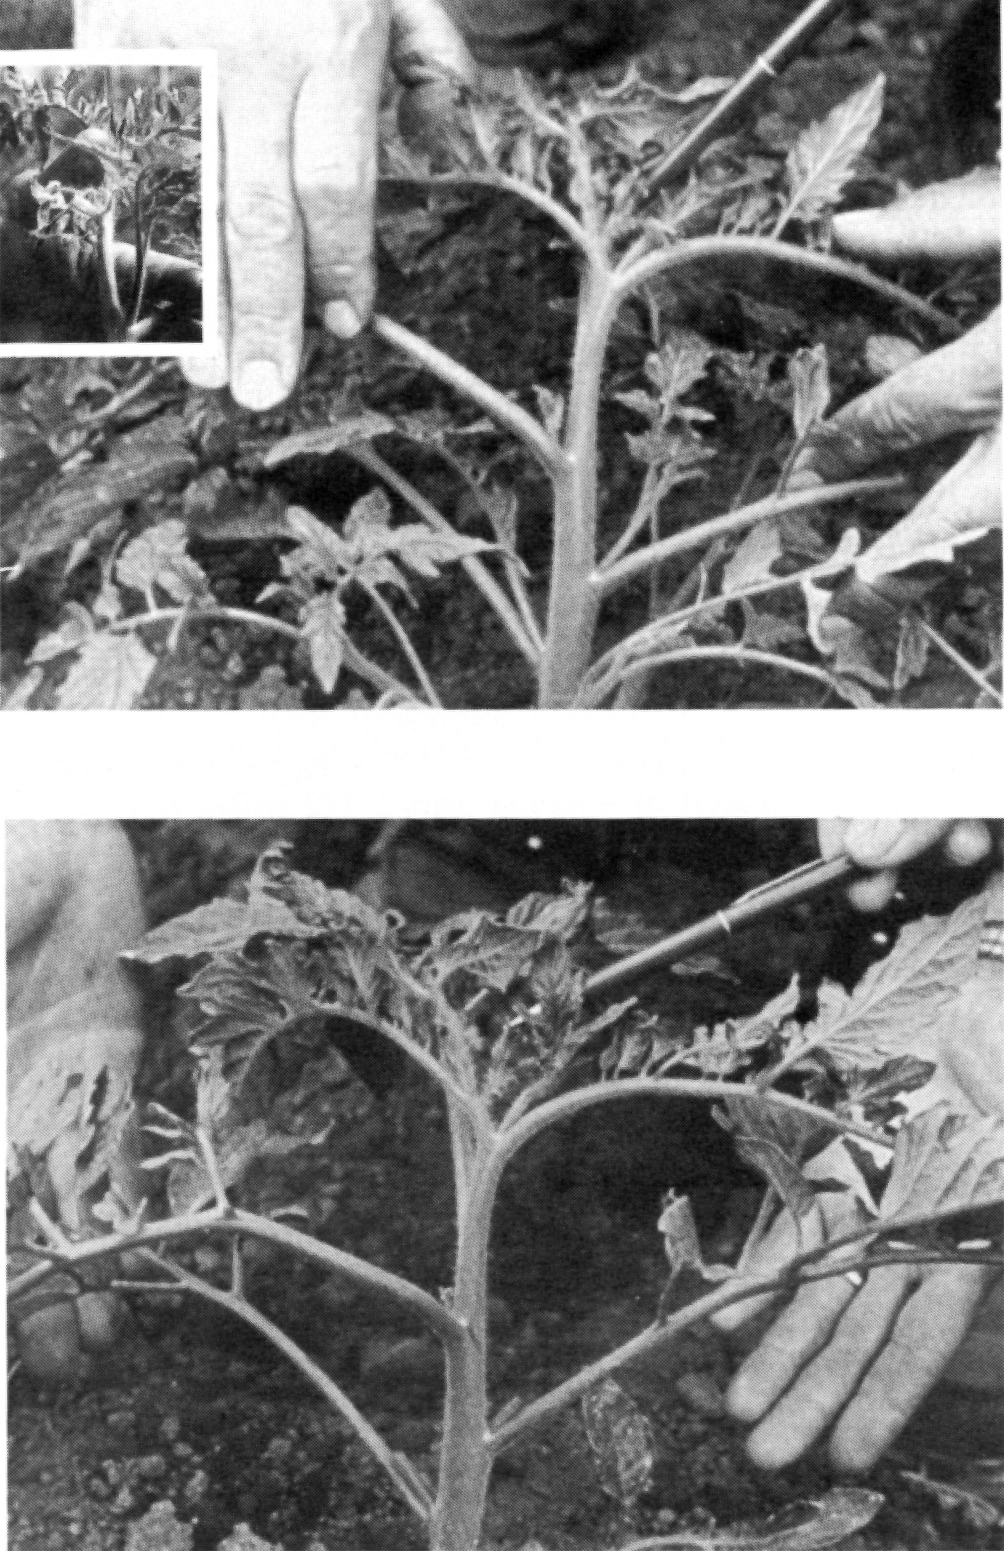 A method of pruning staked tomatoes.